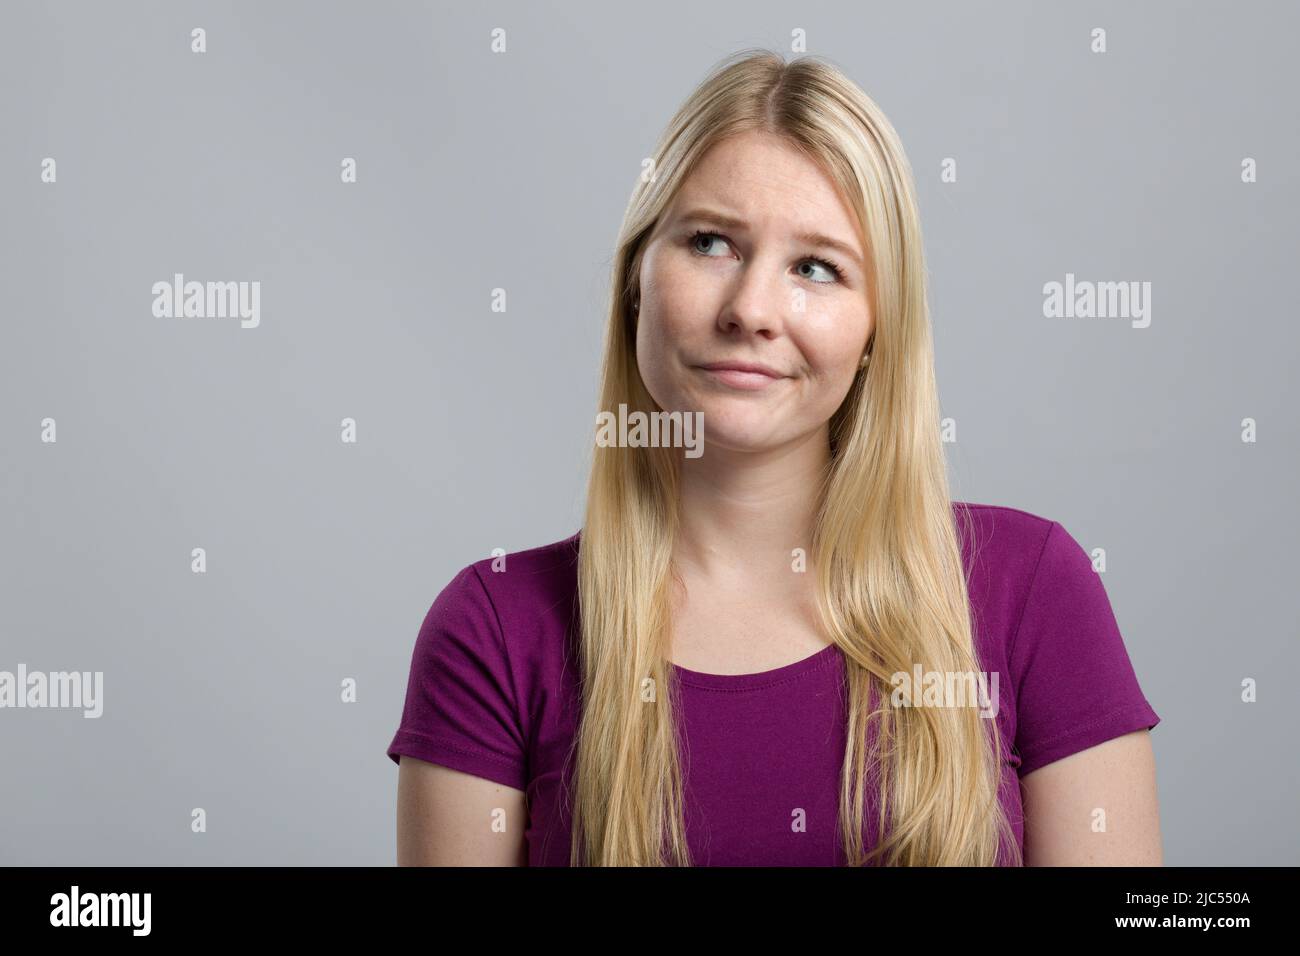 young woman is thinking and shows emotional expressions Stock Photo